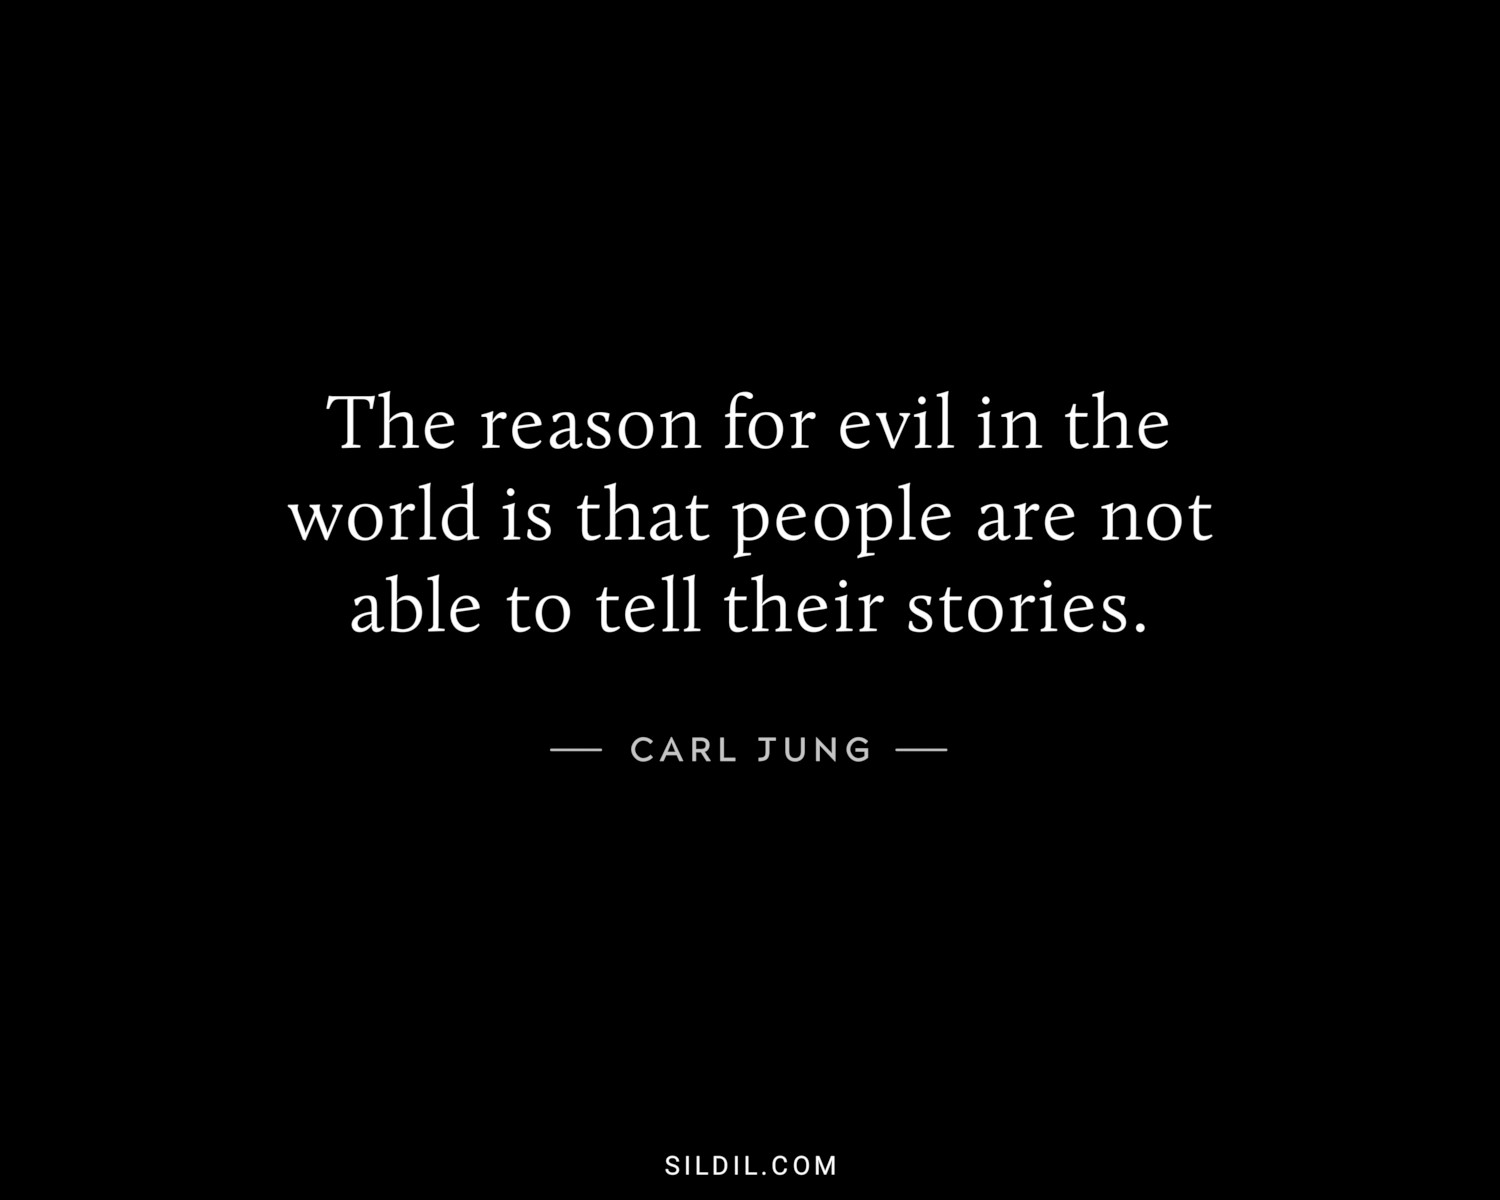 The reason for evil in the world is that people are not able to tell their stories.